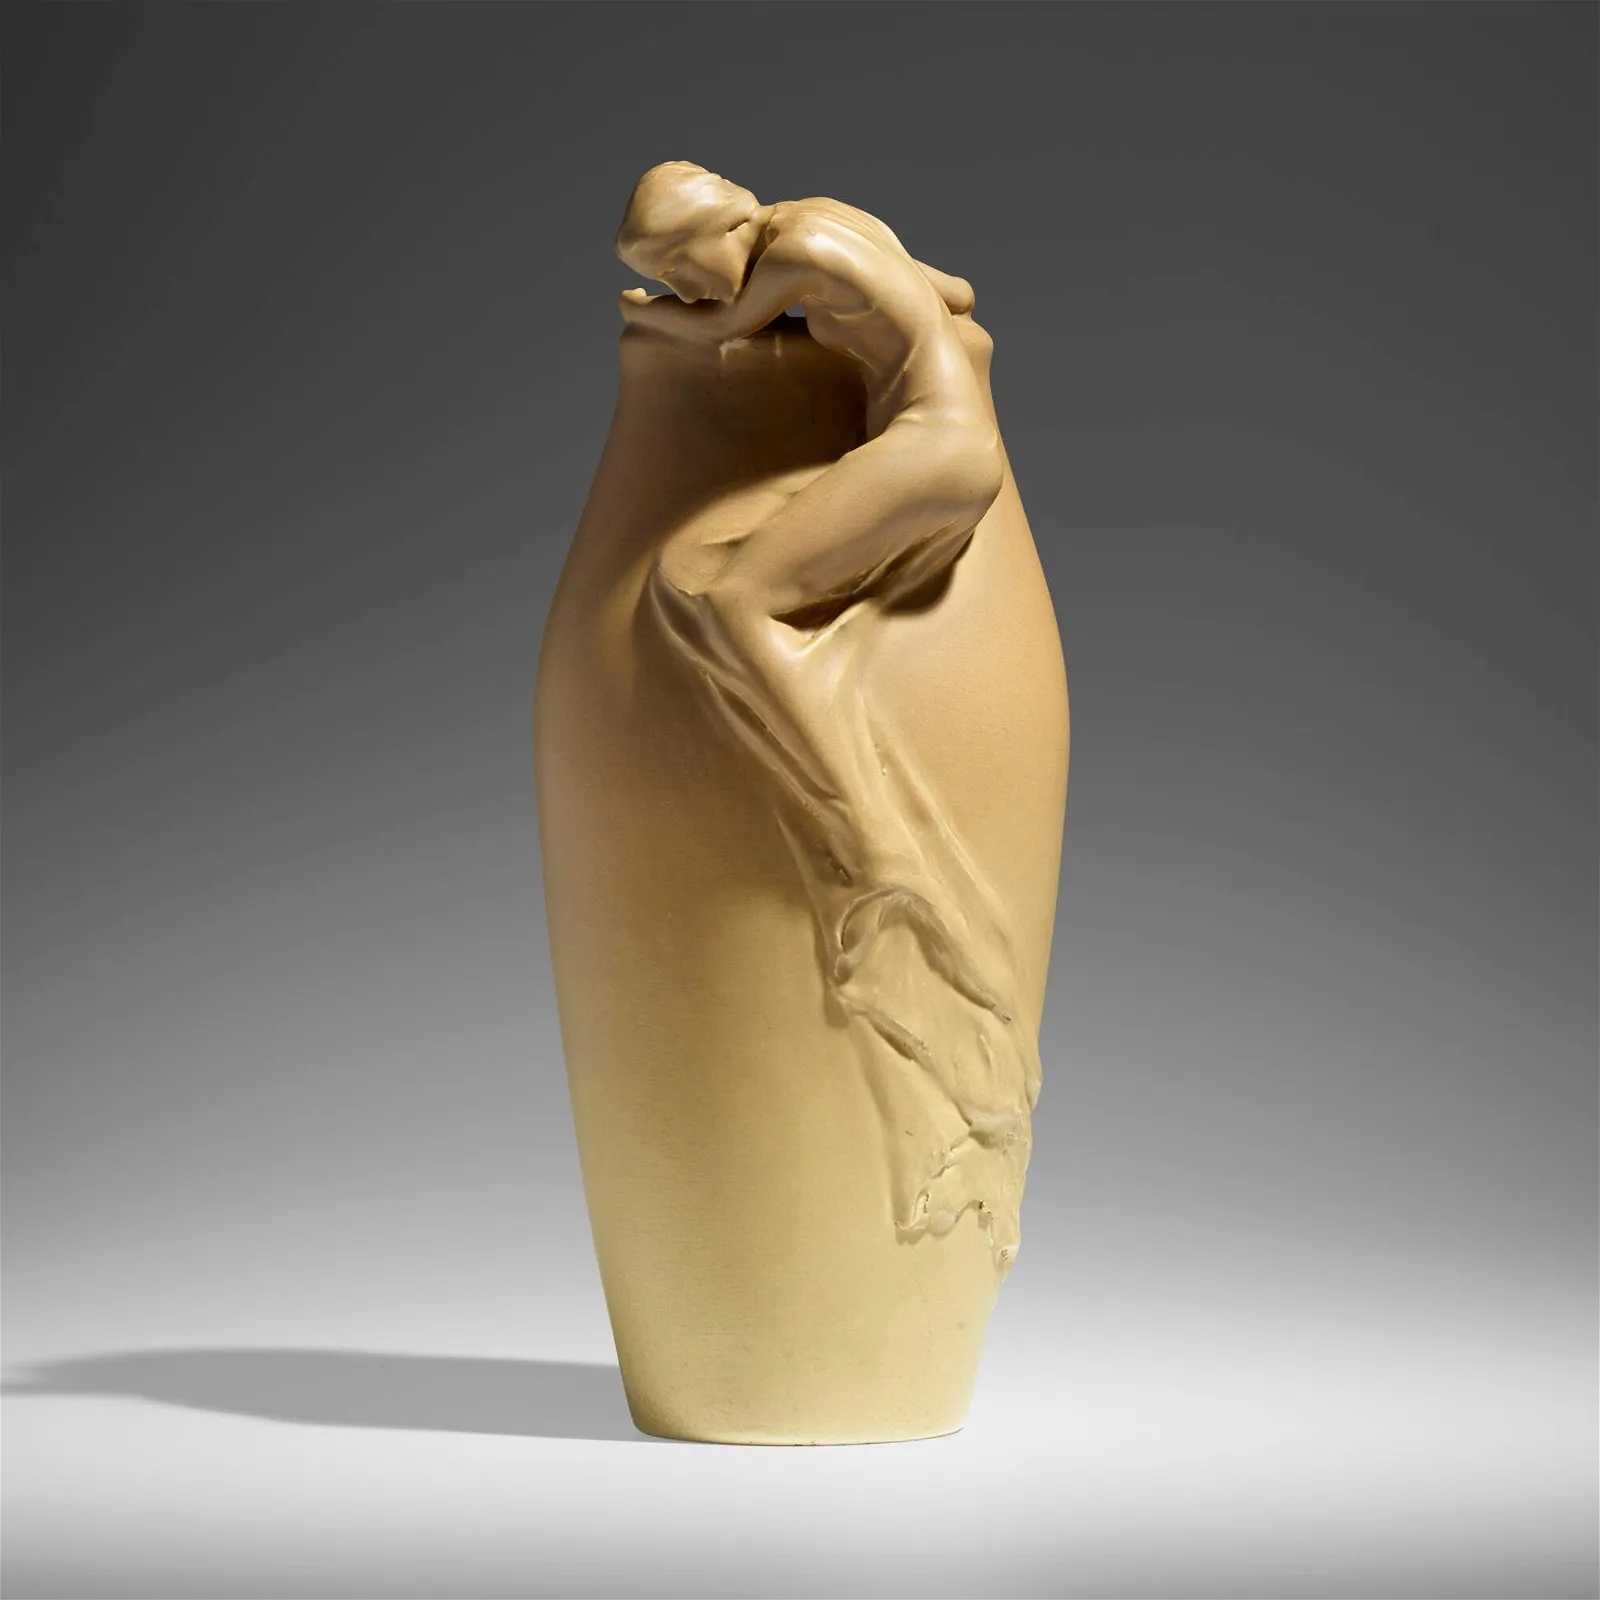 1901 Anna Marie Valentien for Rookwood Pottery large modeled matte figural vase, which sold for $34,060 with buyer’s premium at Rago.